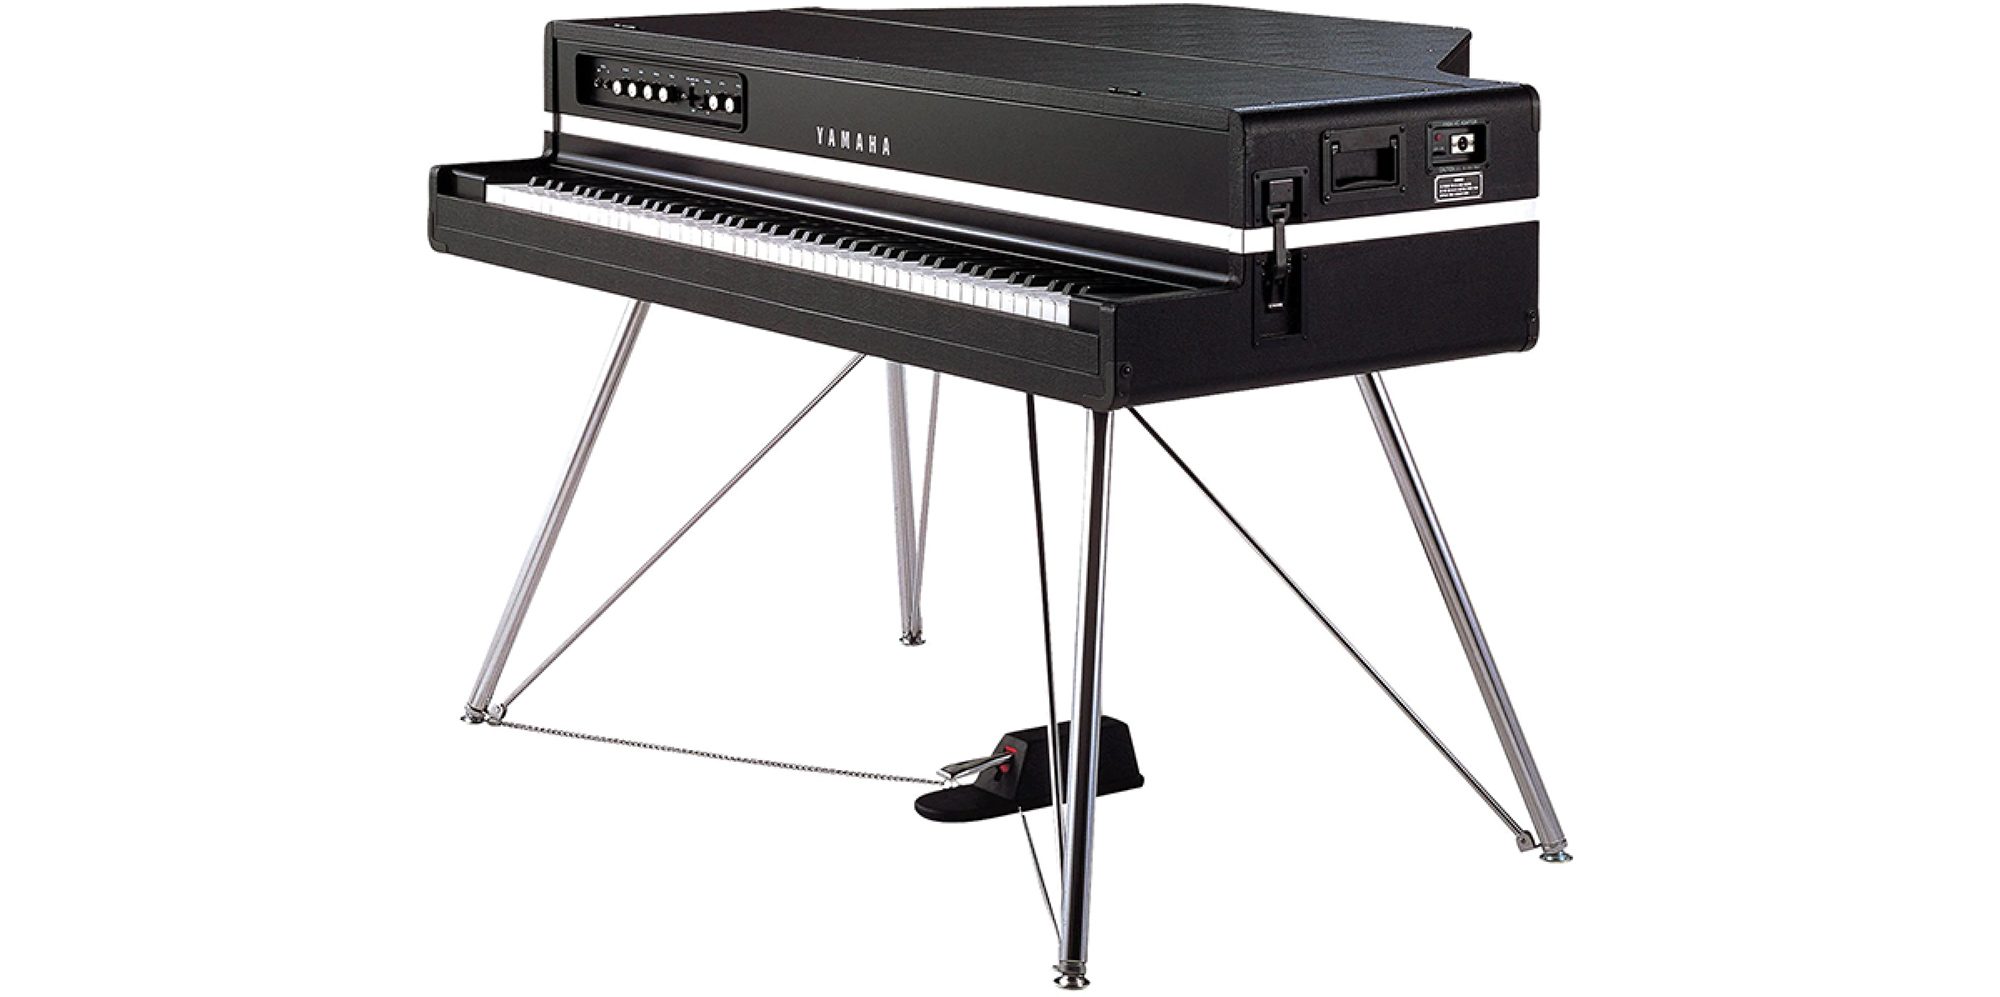 YC Series - YC61, YC73 and YC88 - Features - Stage Keyboards 